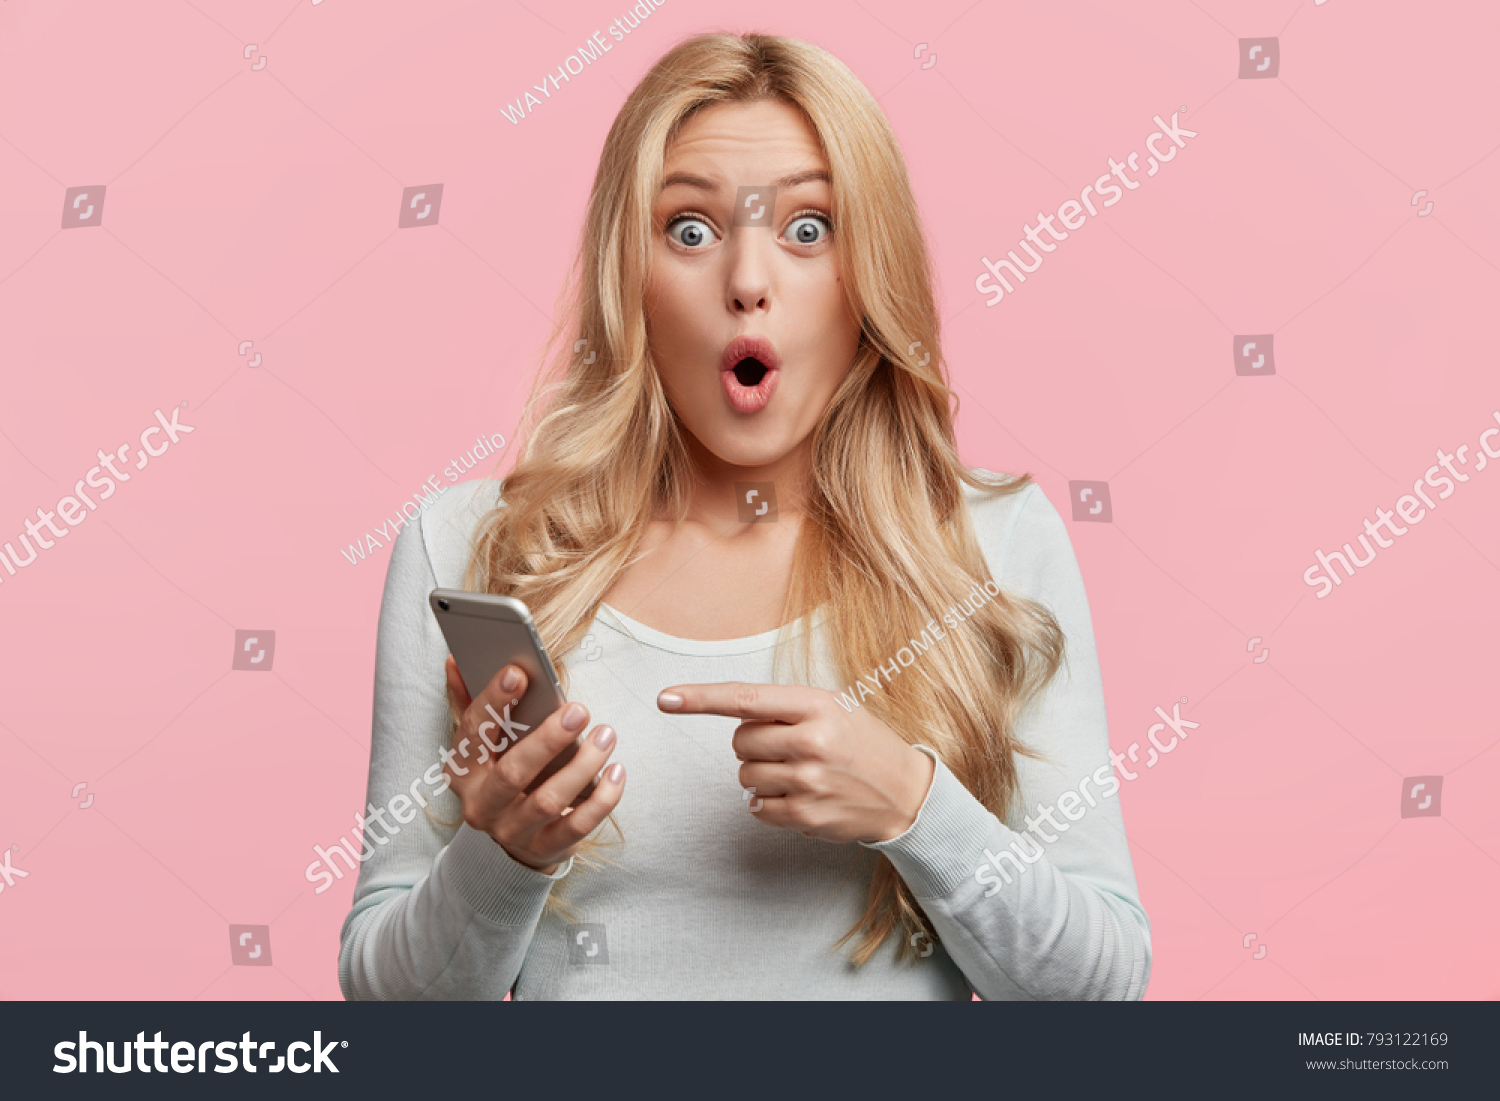 Blonde young female with pleasant appearance looks with terrified expression in smart phone, reads shocking news on webpage, isolated over pink background. Woman indicates at digital telephone #793122169